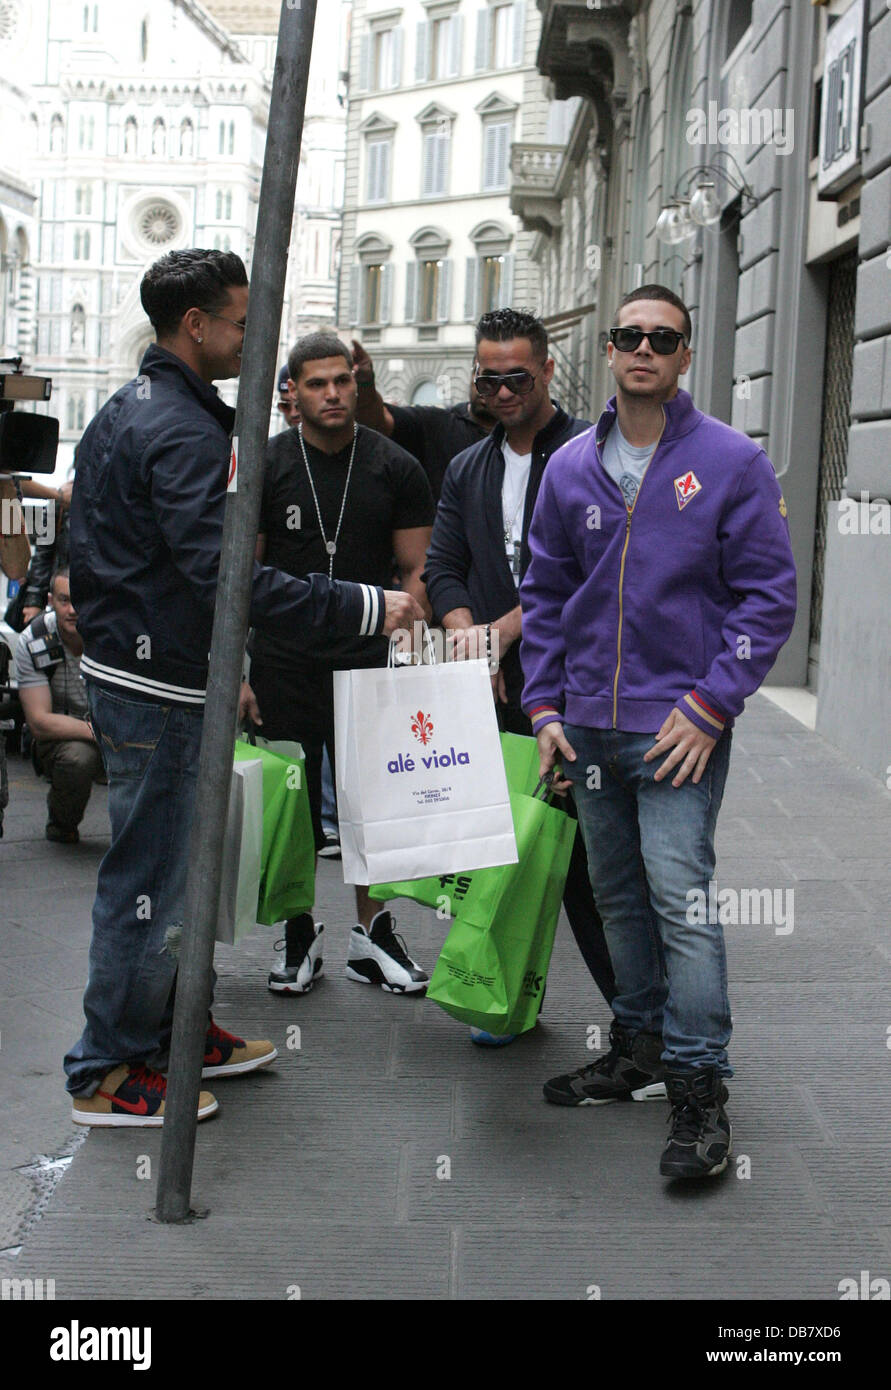 DJ Pauly D, Ronnie Ortiz-Magro, Mike 'The Situation' Sorrentino and Vinny Guadagnino  shopping in Florence while filming the reality show 'Jersey Shore' Florence, Italy - 15.05.11 Stock Photo